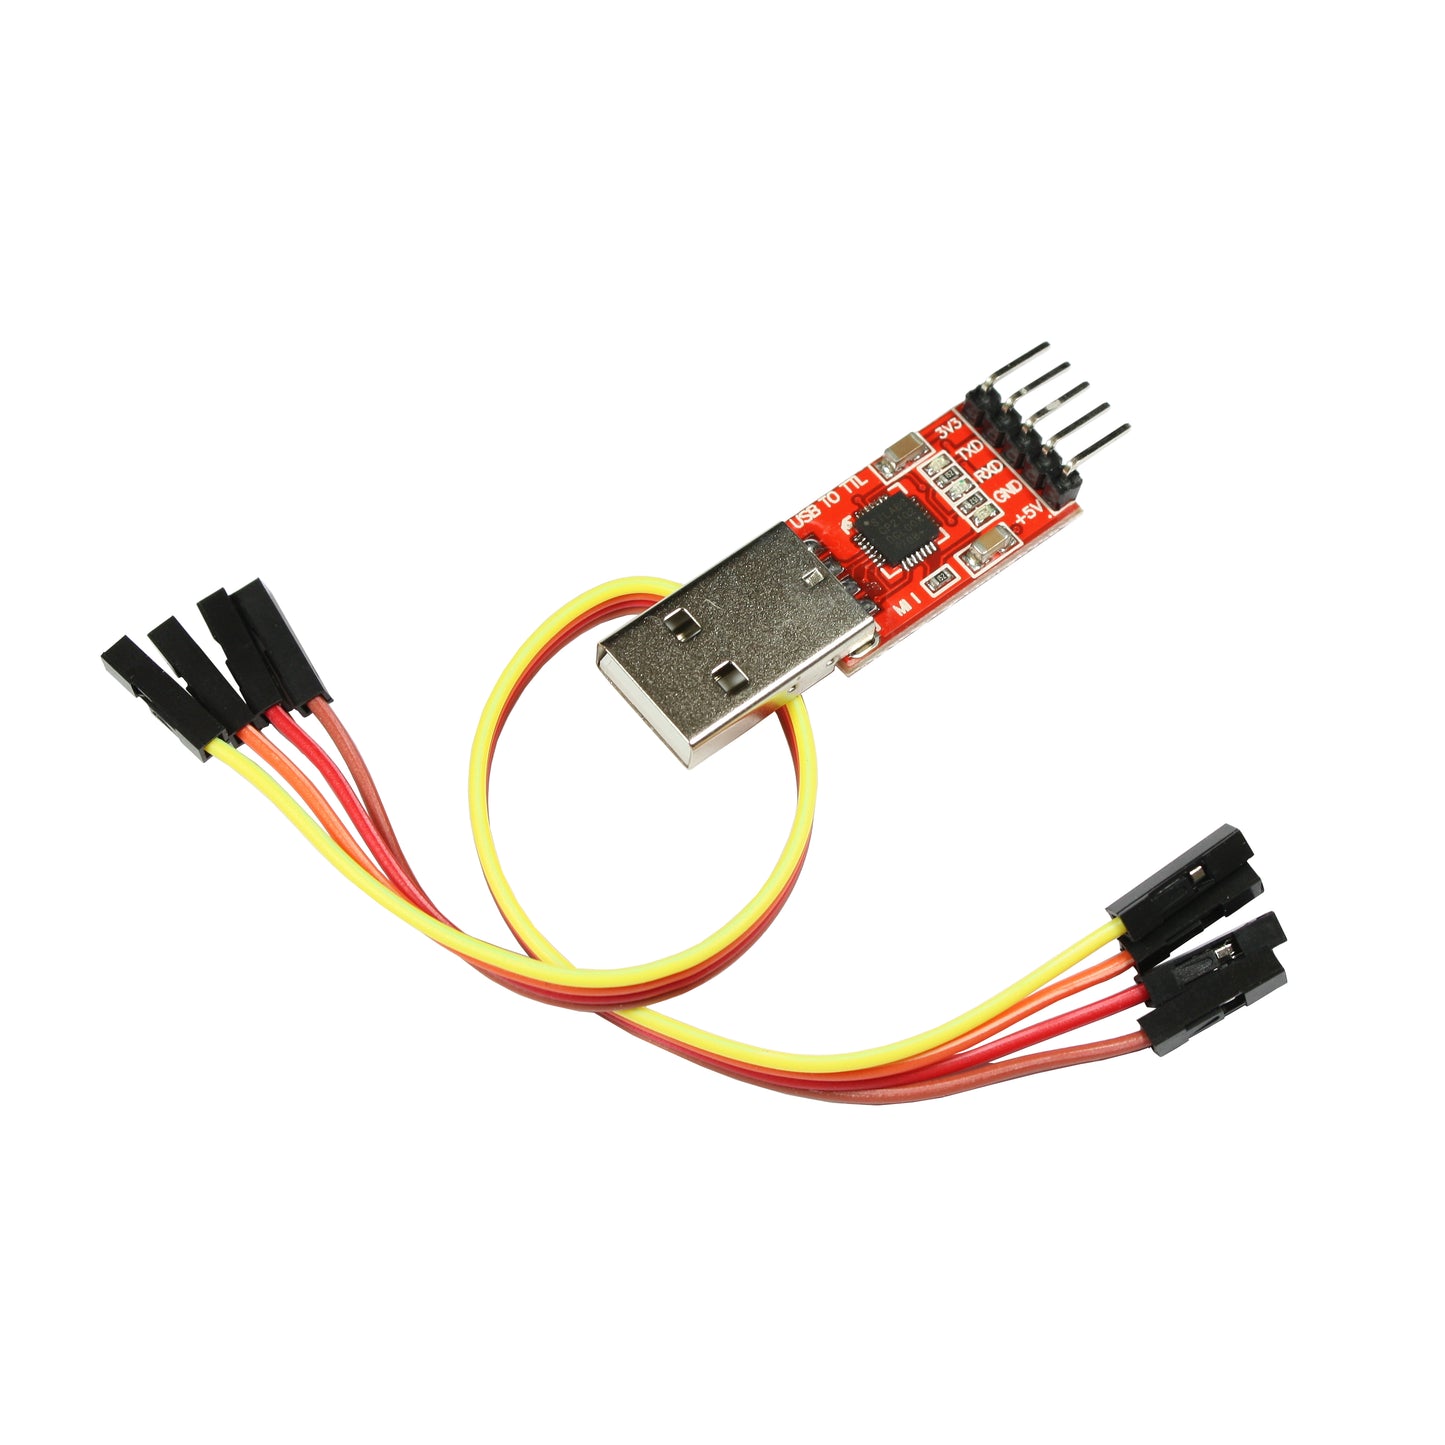 USB to TTL, UART Converter Adapter, Serial Connector with CP2102 and Wires